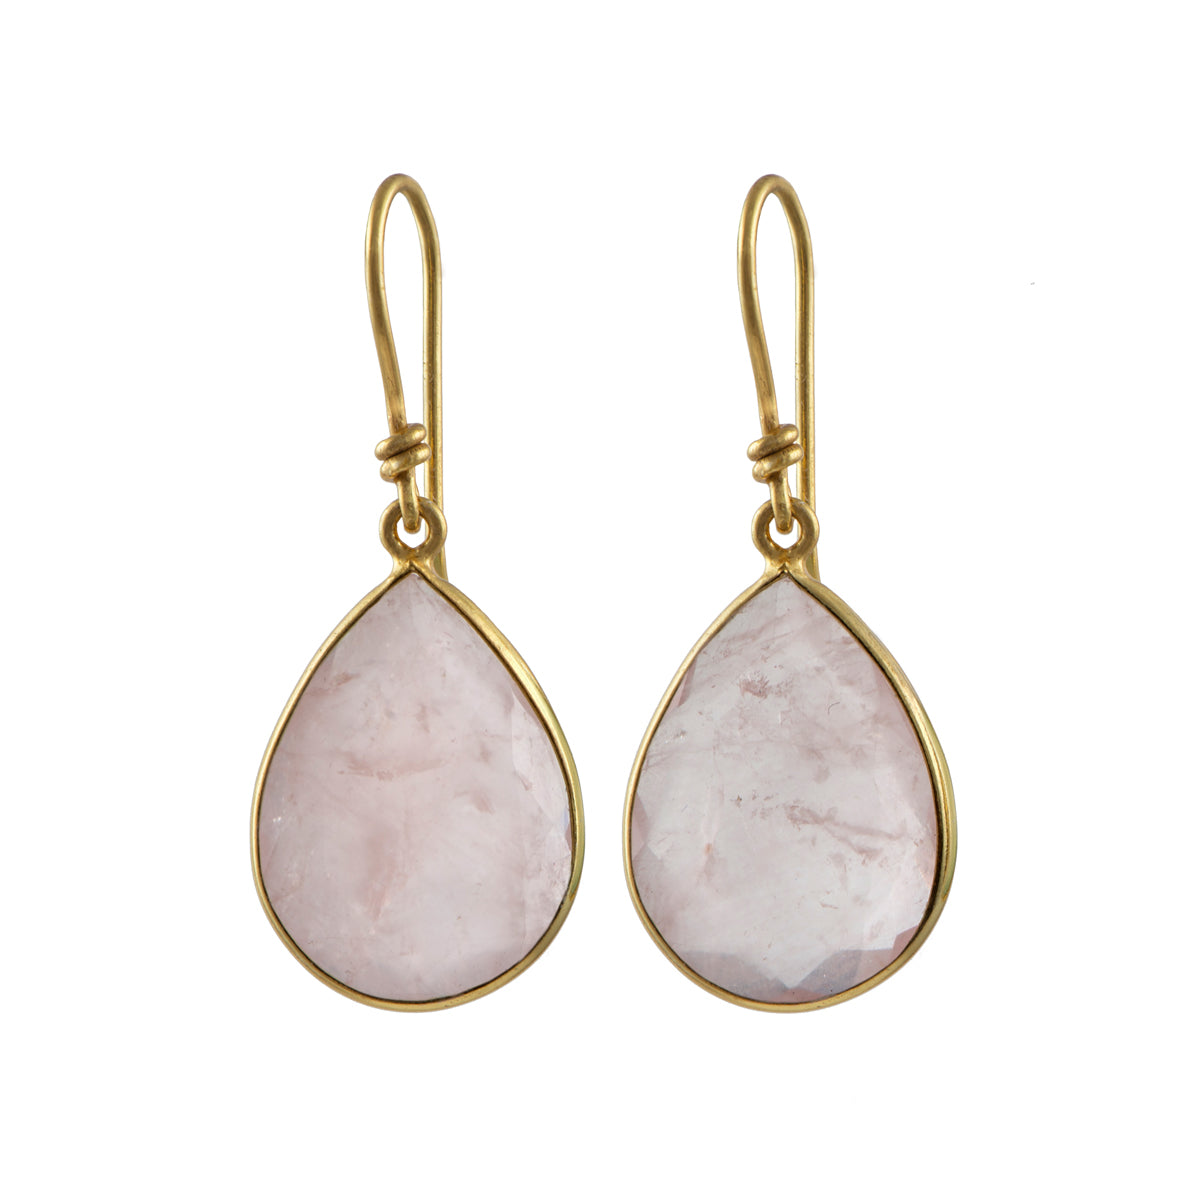 Rose Quartz Gold Plated Sterling Silver Earrings with a Tear Drop Shaped Gemstone